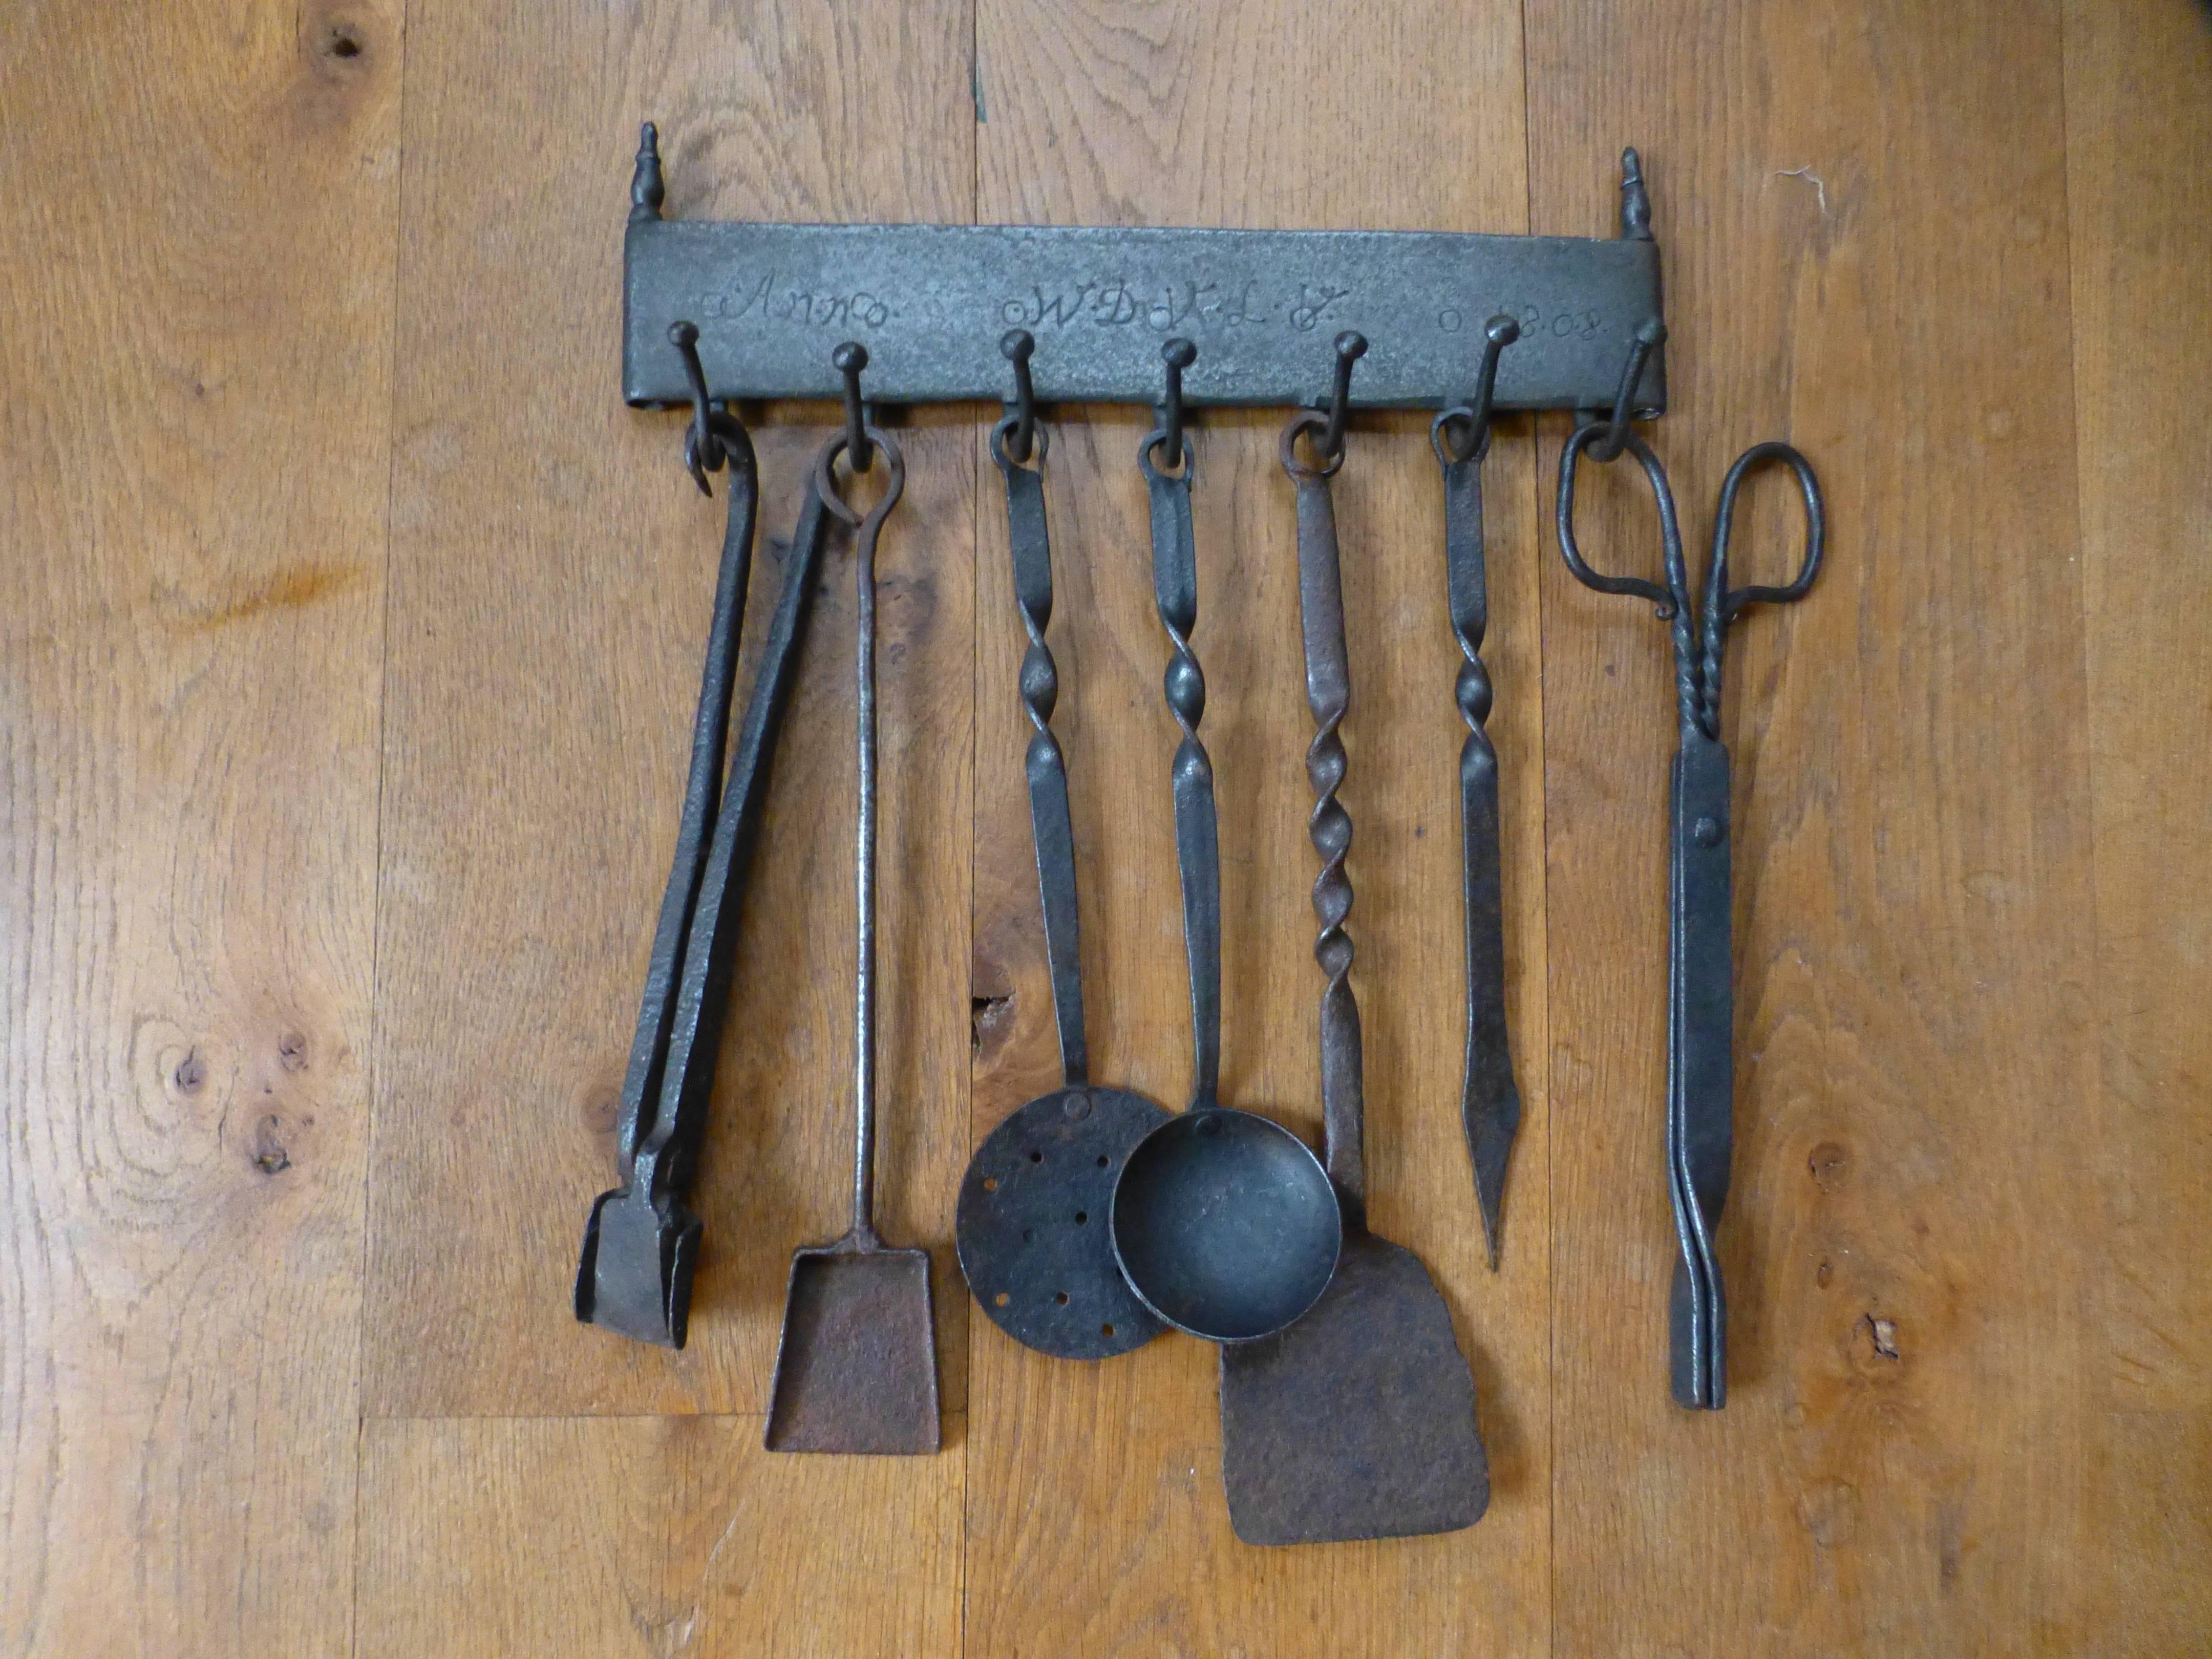 18th-19th century Dutch fireplace tools used for cooking in an open fire. Set of seven tools and a hanger all made of wrought iron.

We have a unique and specialized collection of antique and used fireplace accessories consisting of more than 1000